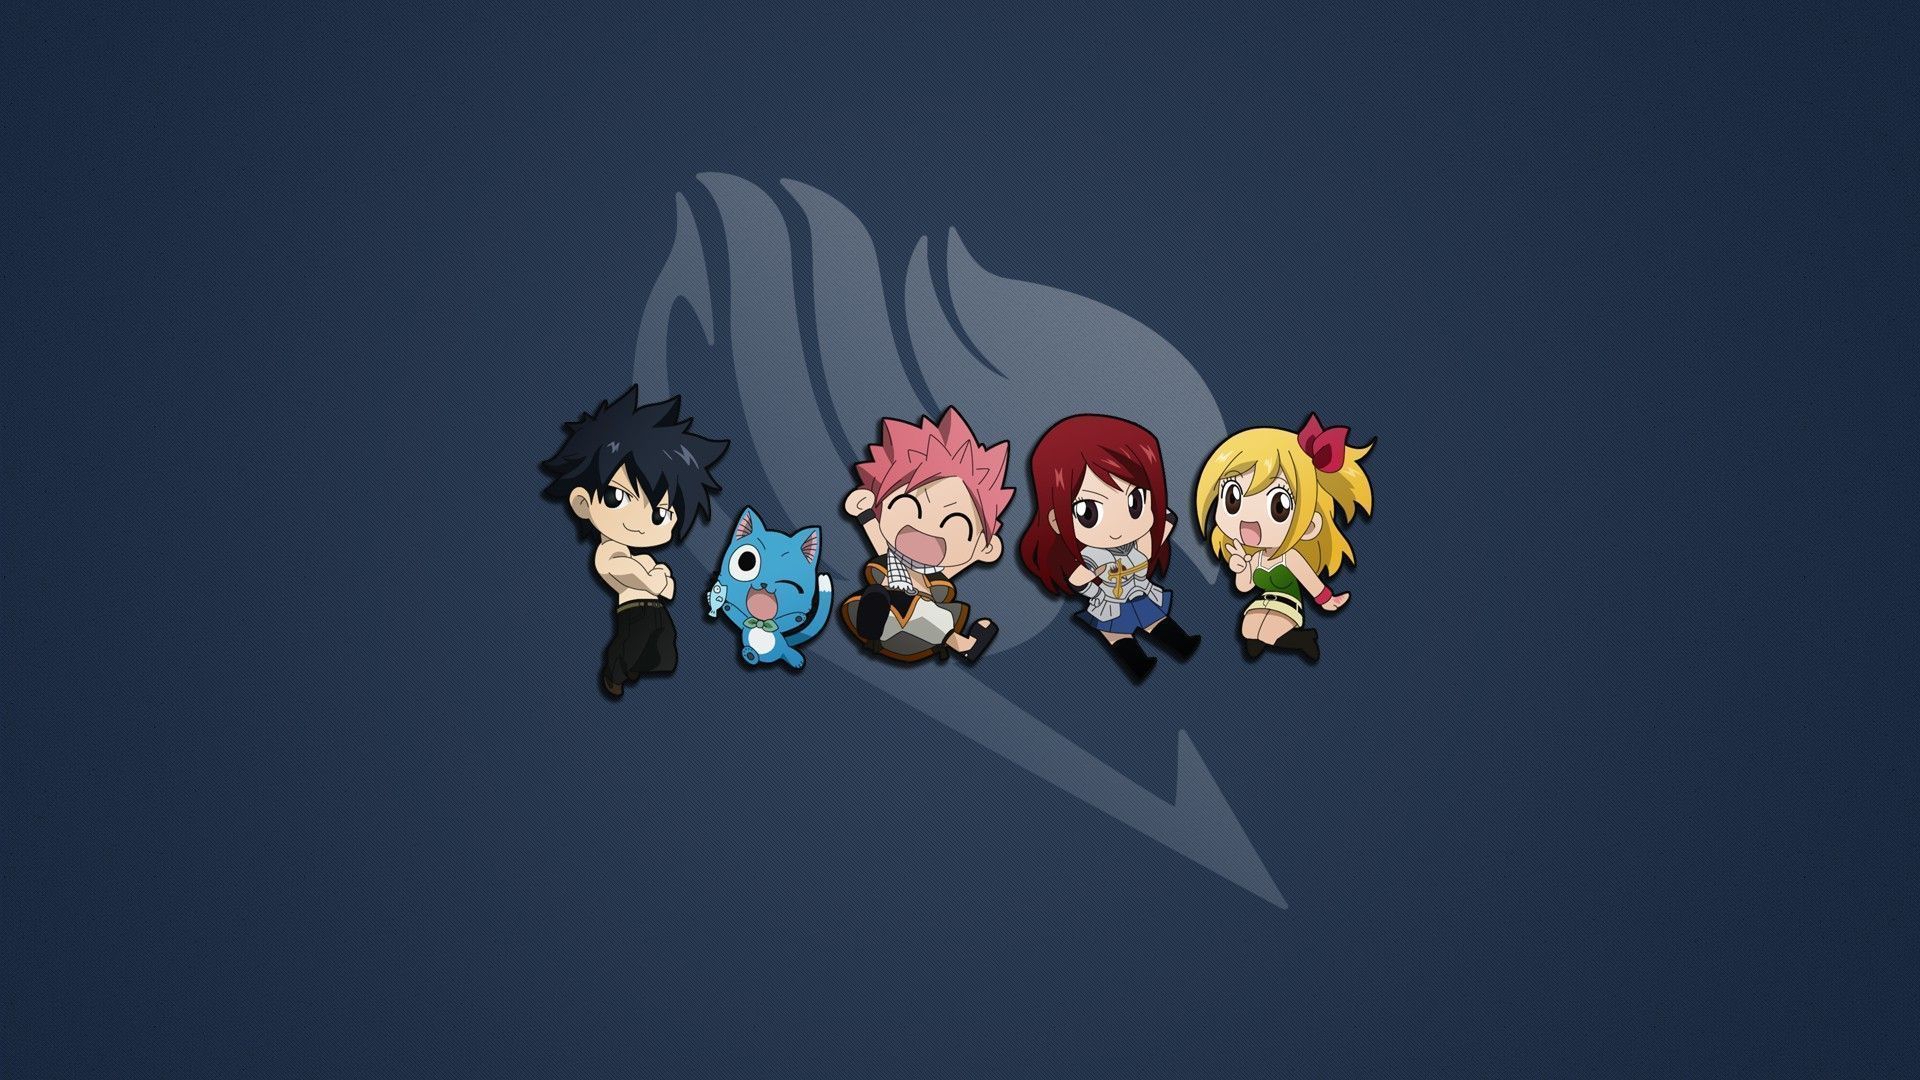 Fairy Tail 2015 Wallpapers - Wallpaper Cave